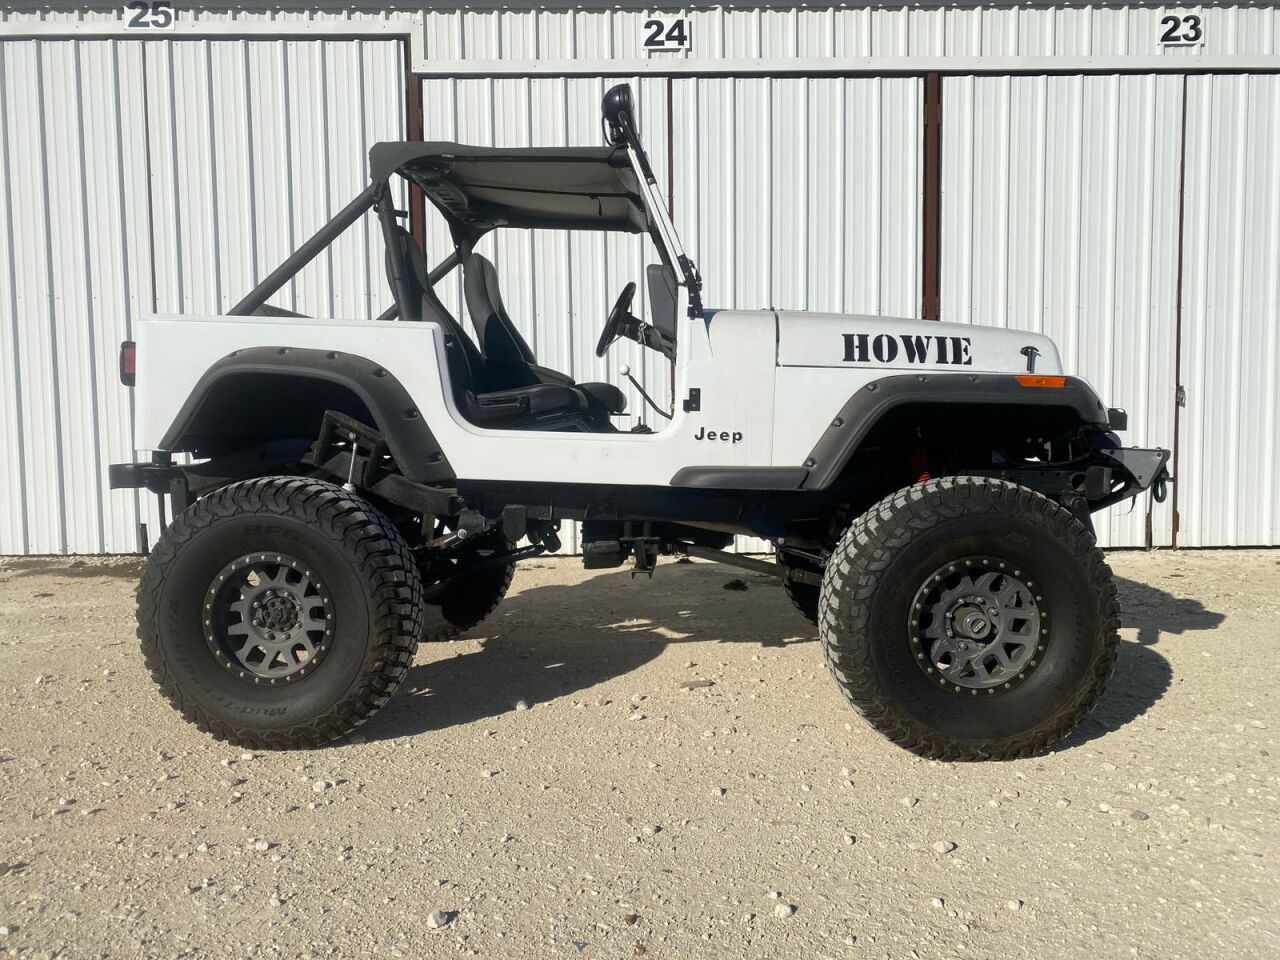 1989 Jeep Wrangler For Sale In Ardmore, OK ®